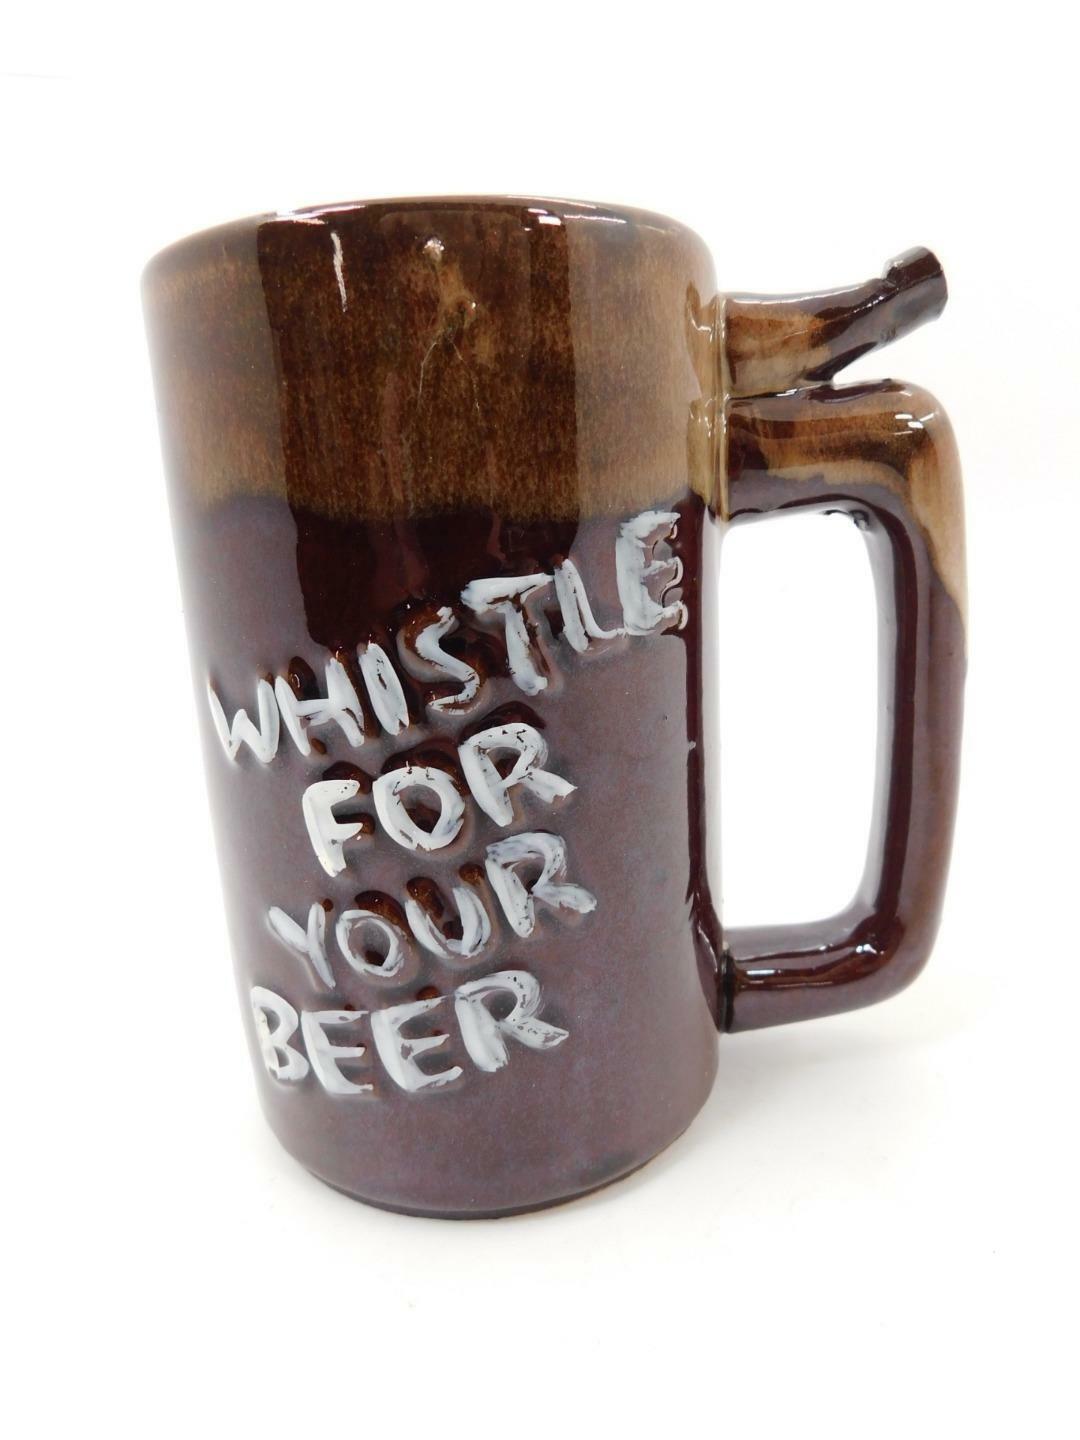 Vintage Wet Your Whistle / Whistle for Your Beer Ceramic Mug  #R-2-1-05